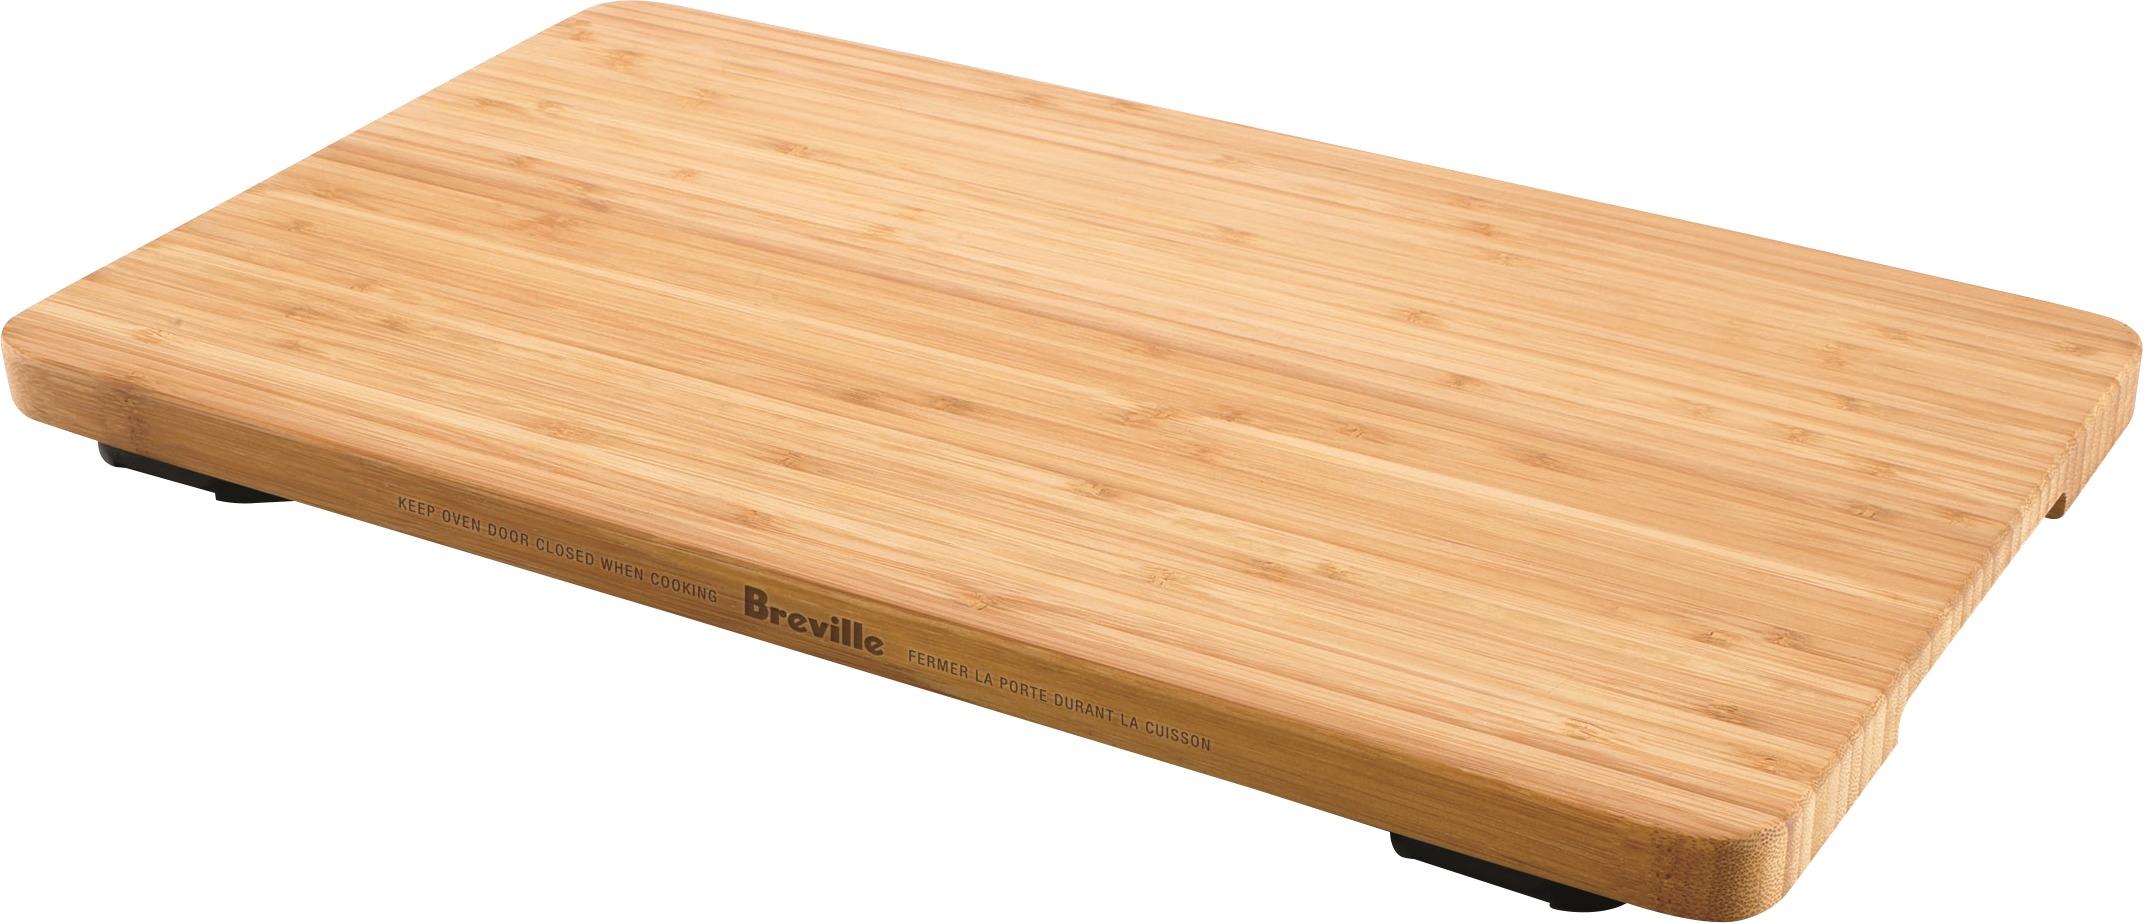 Angle View: Breville - Cutting Board - Bamboo